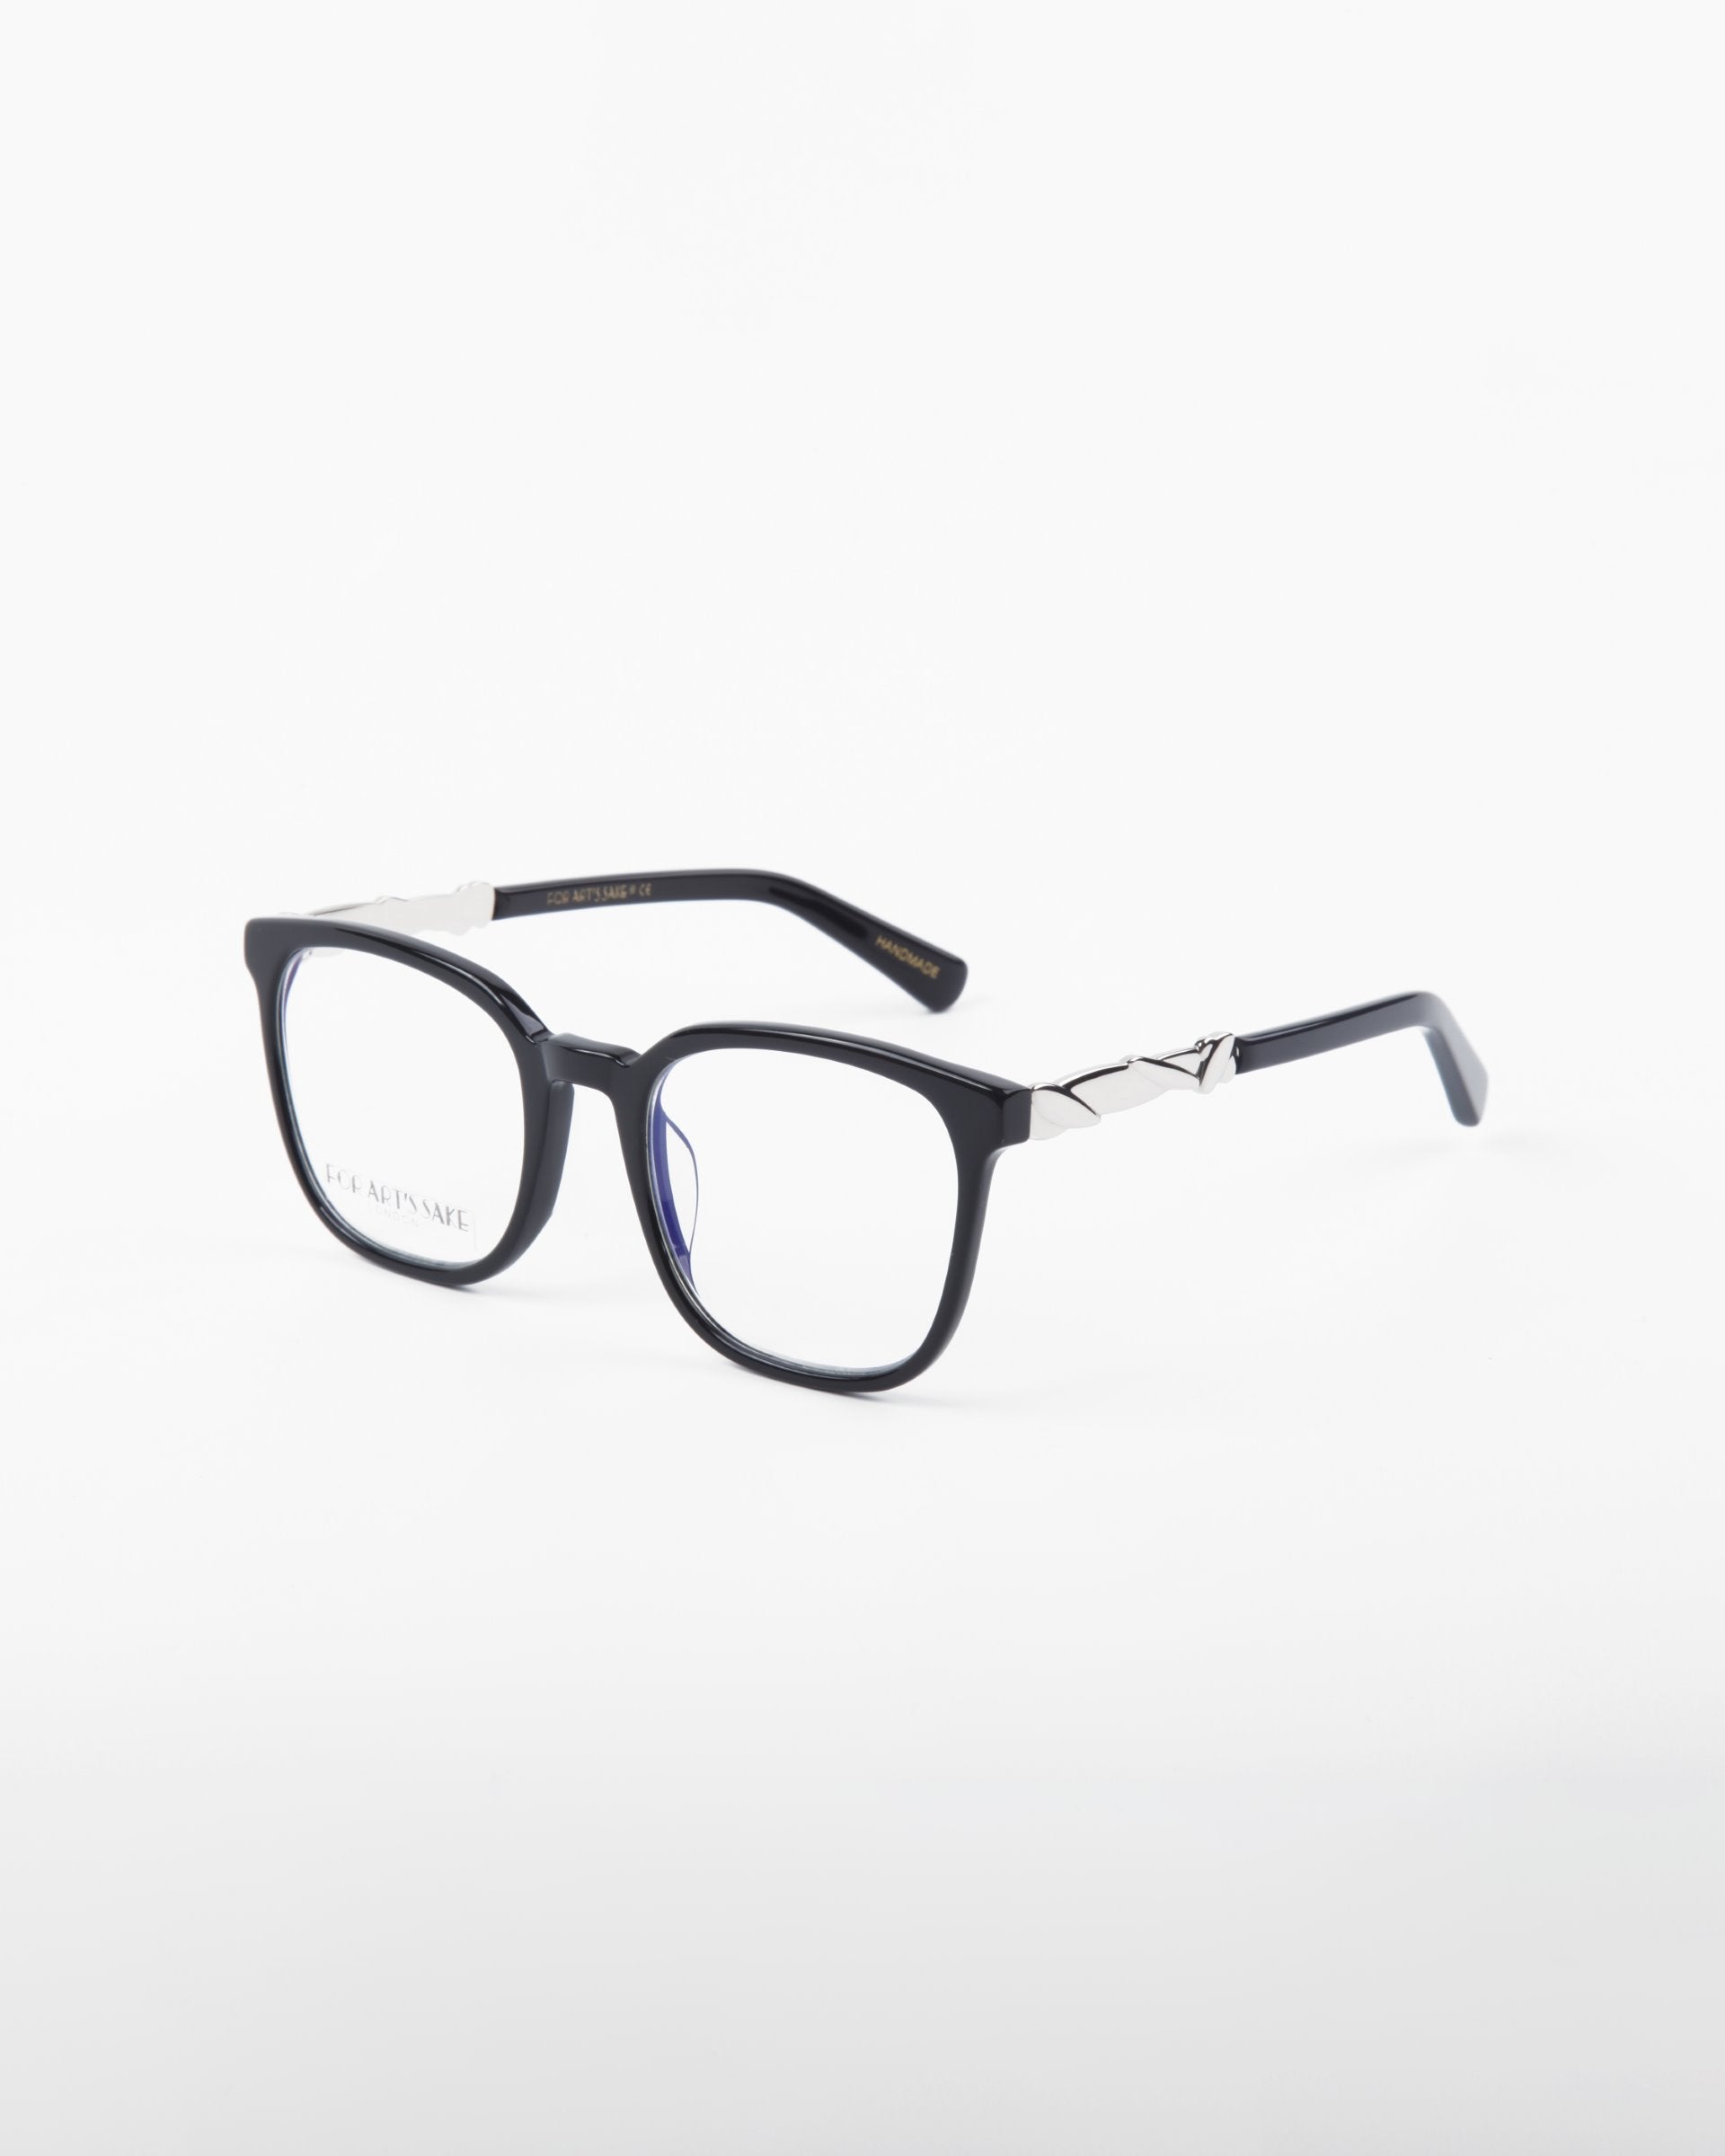 A pair of Molten by For Art's Sake® black-rimmed eyeglasses with square lenses is displayed on a white background. These prescription eyewear glasses feature metallic accents on the temples, adding a touch of style and elegance to the design.
